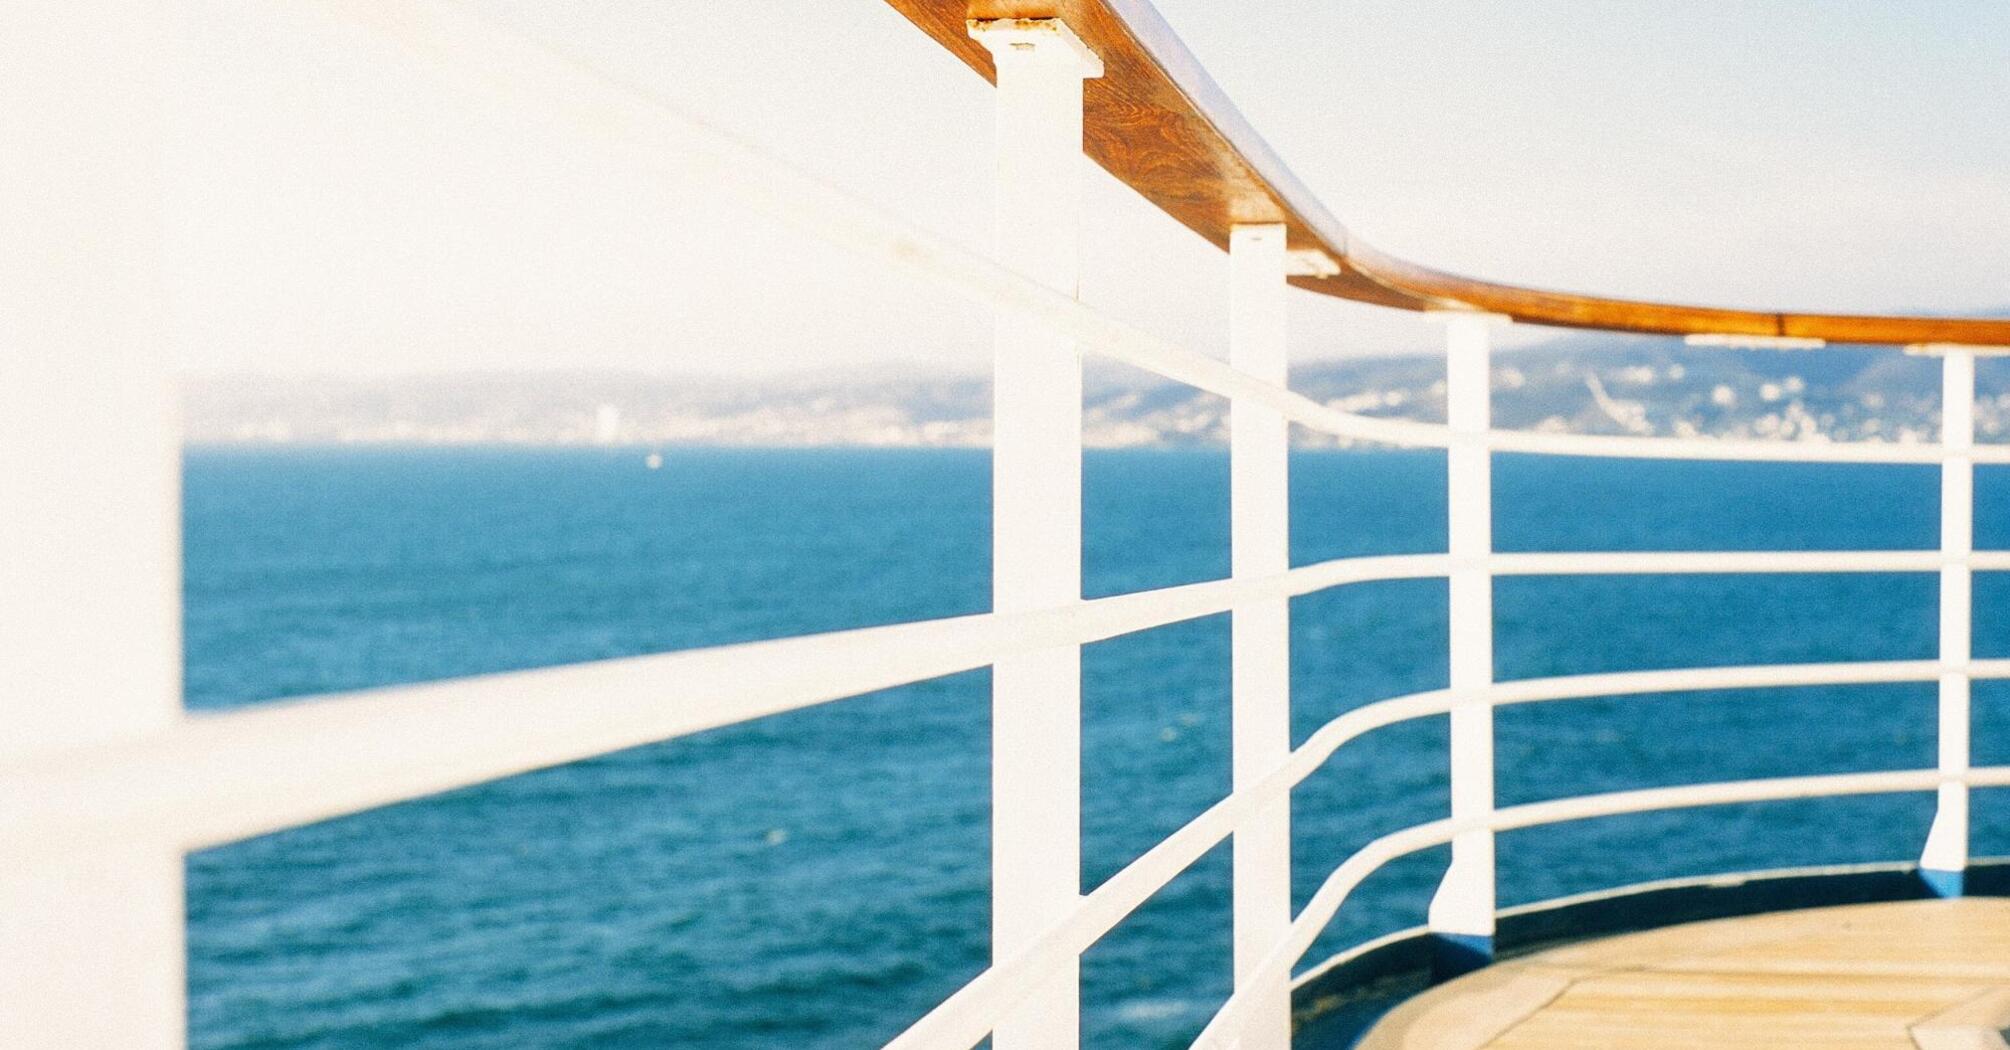 Aboard the ship, enjoying the view of the endless ocean